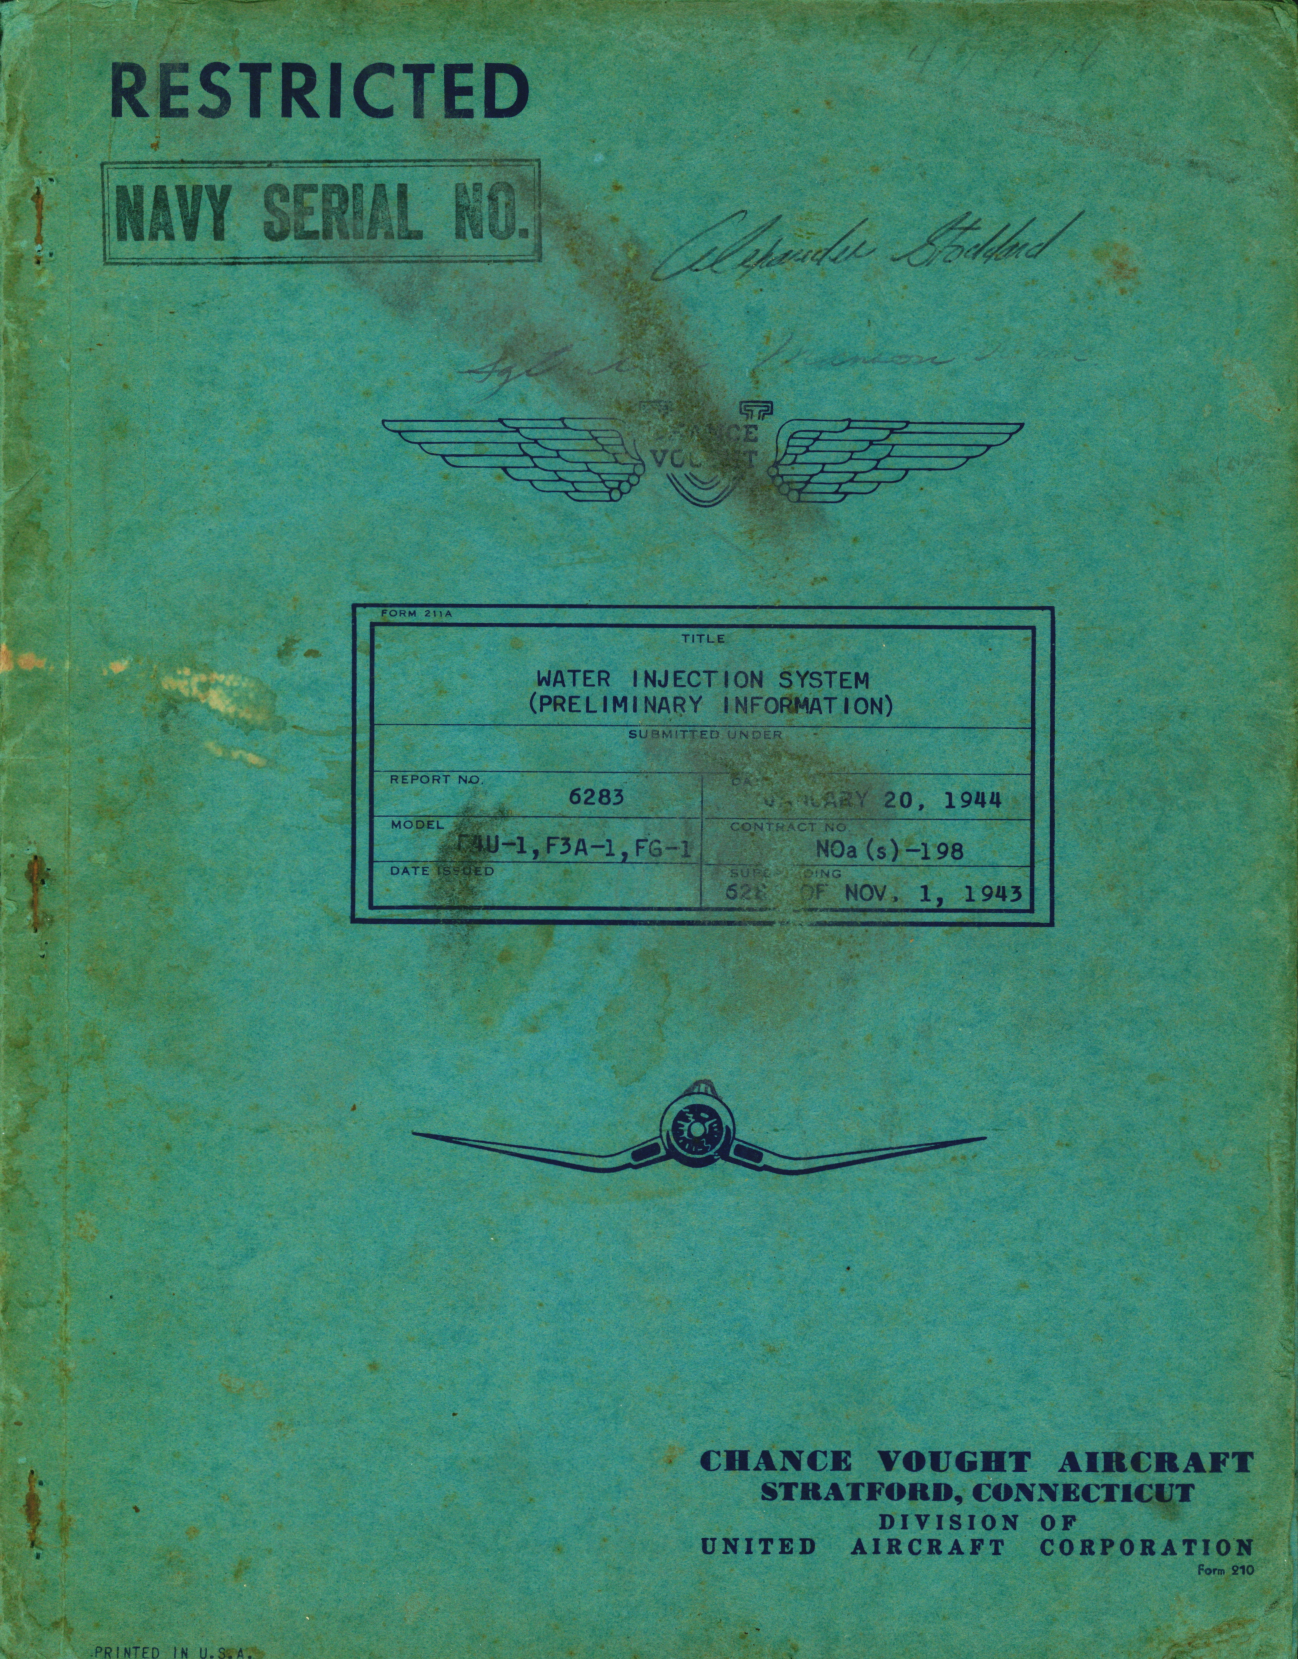 Sample page 1 from AirCorps Library document: Preliminary Information for F4U-1, F3A-1 and FG-1 Water Injection System